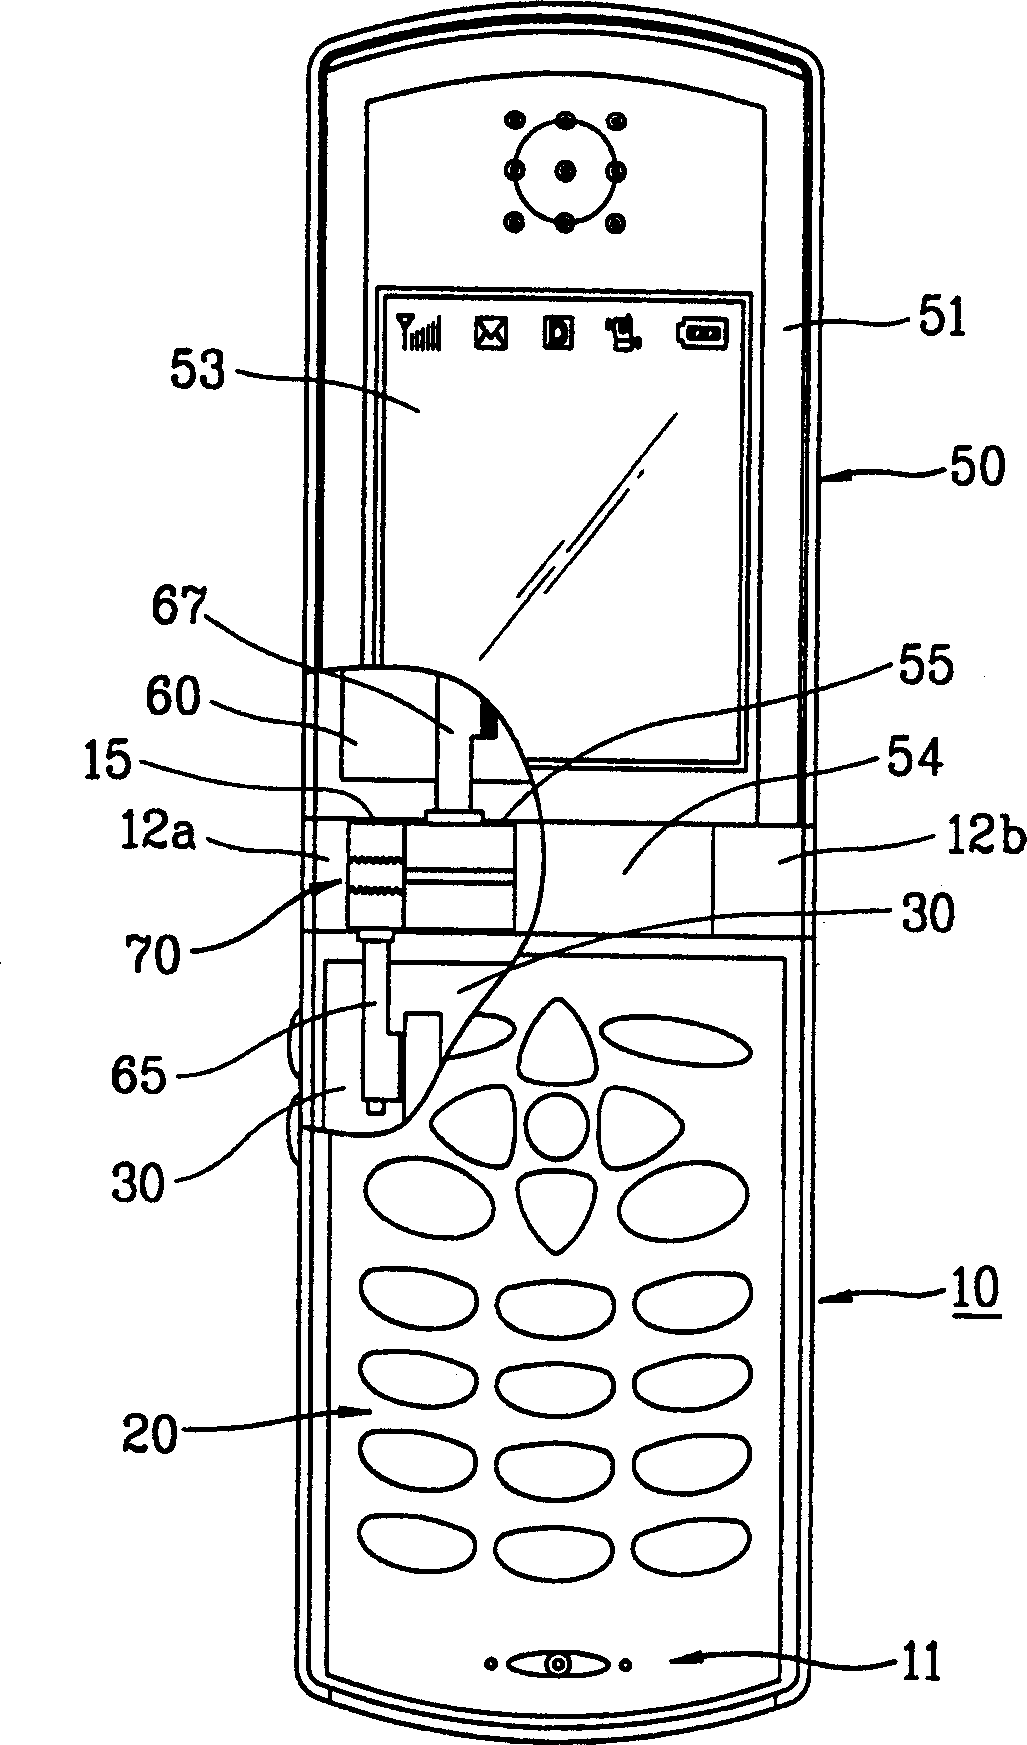 FPCB connection mechanism